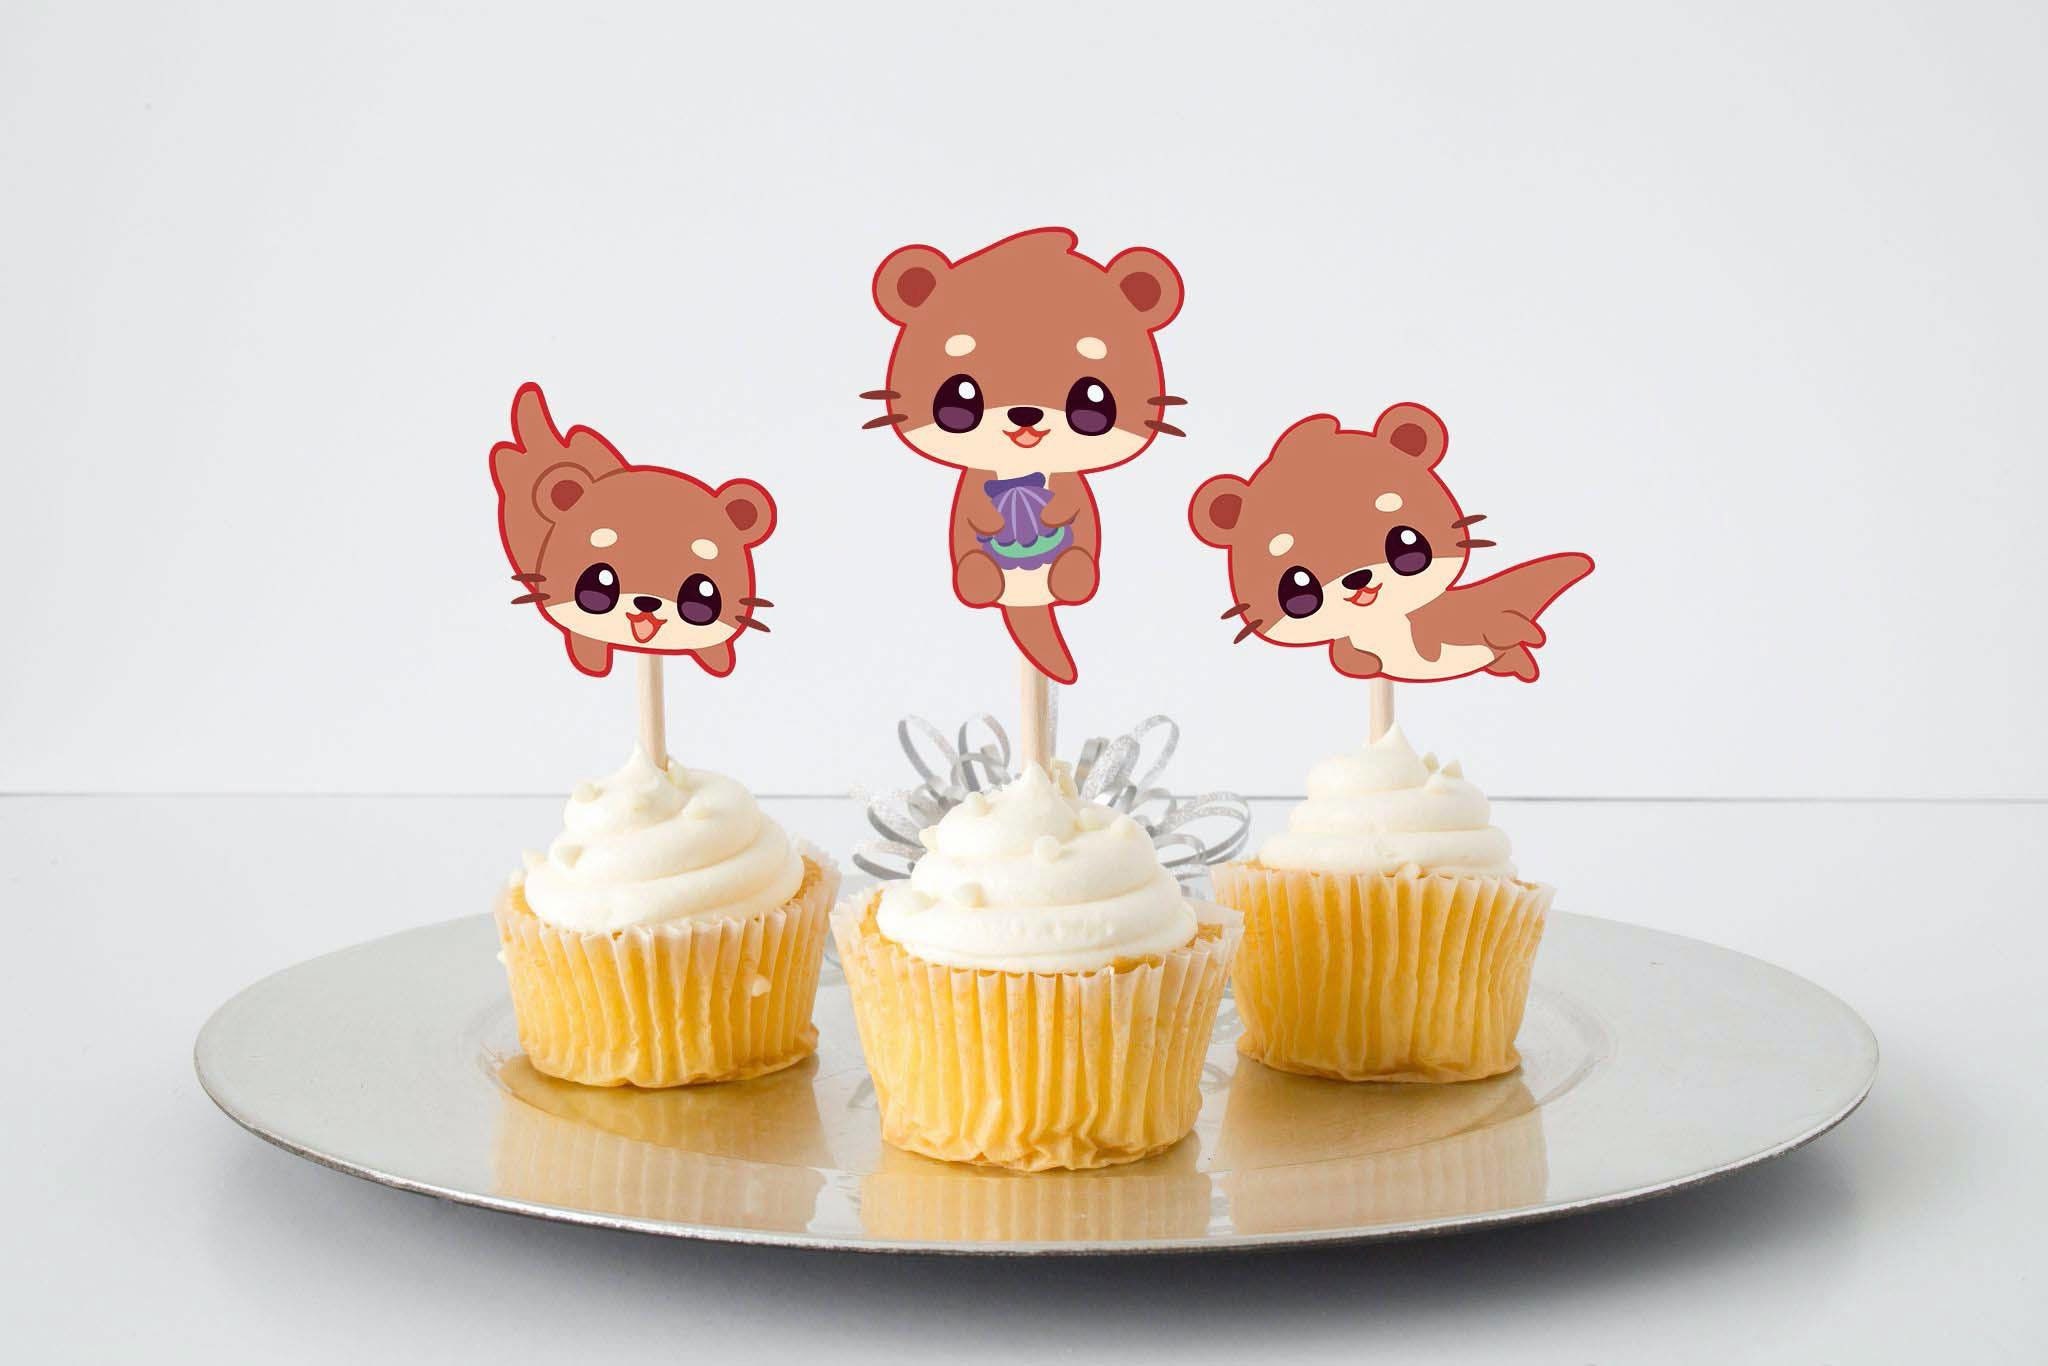  25pcs cute bear Birthday Party Supplies,The cute bear Birthday  Party Cupcake Toppers for Kids Gift Birthday Party Favors : Toys & Games